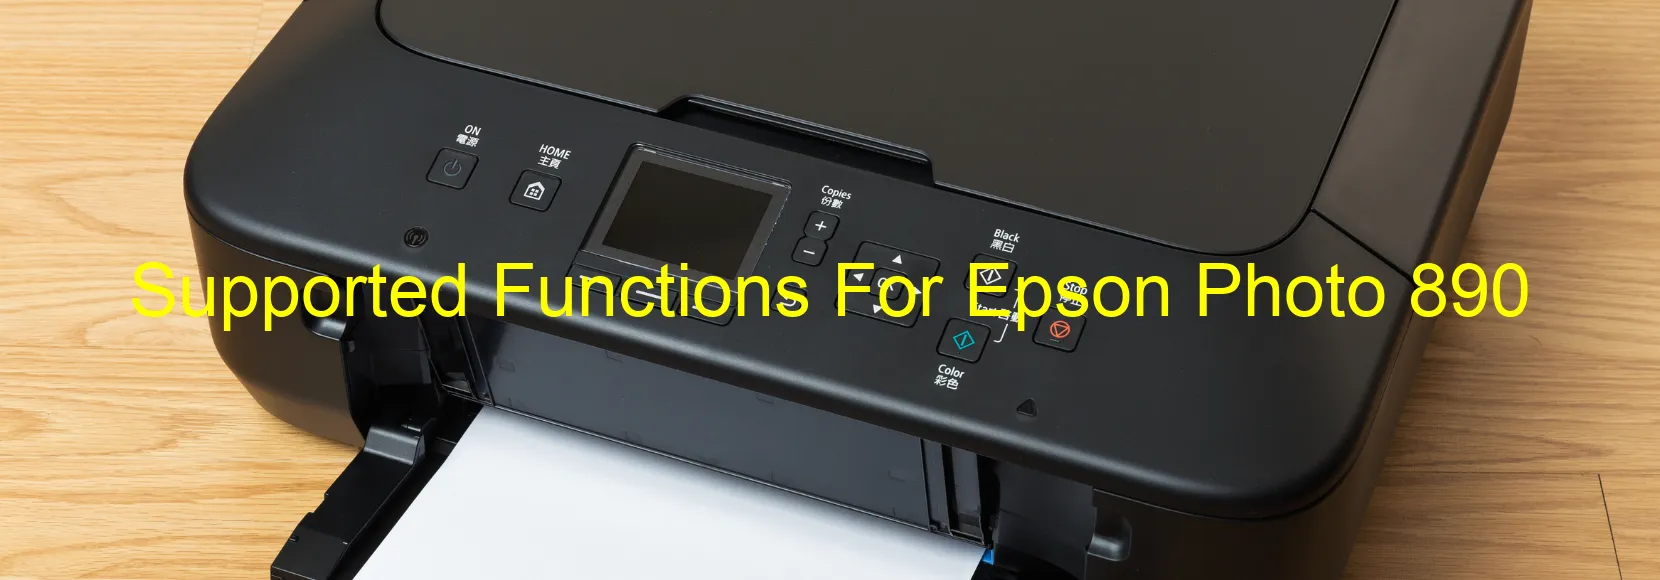 supported-functions-for-epson-photo-890.webp